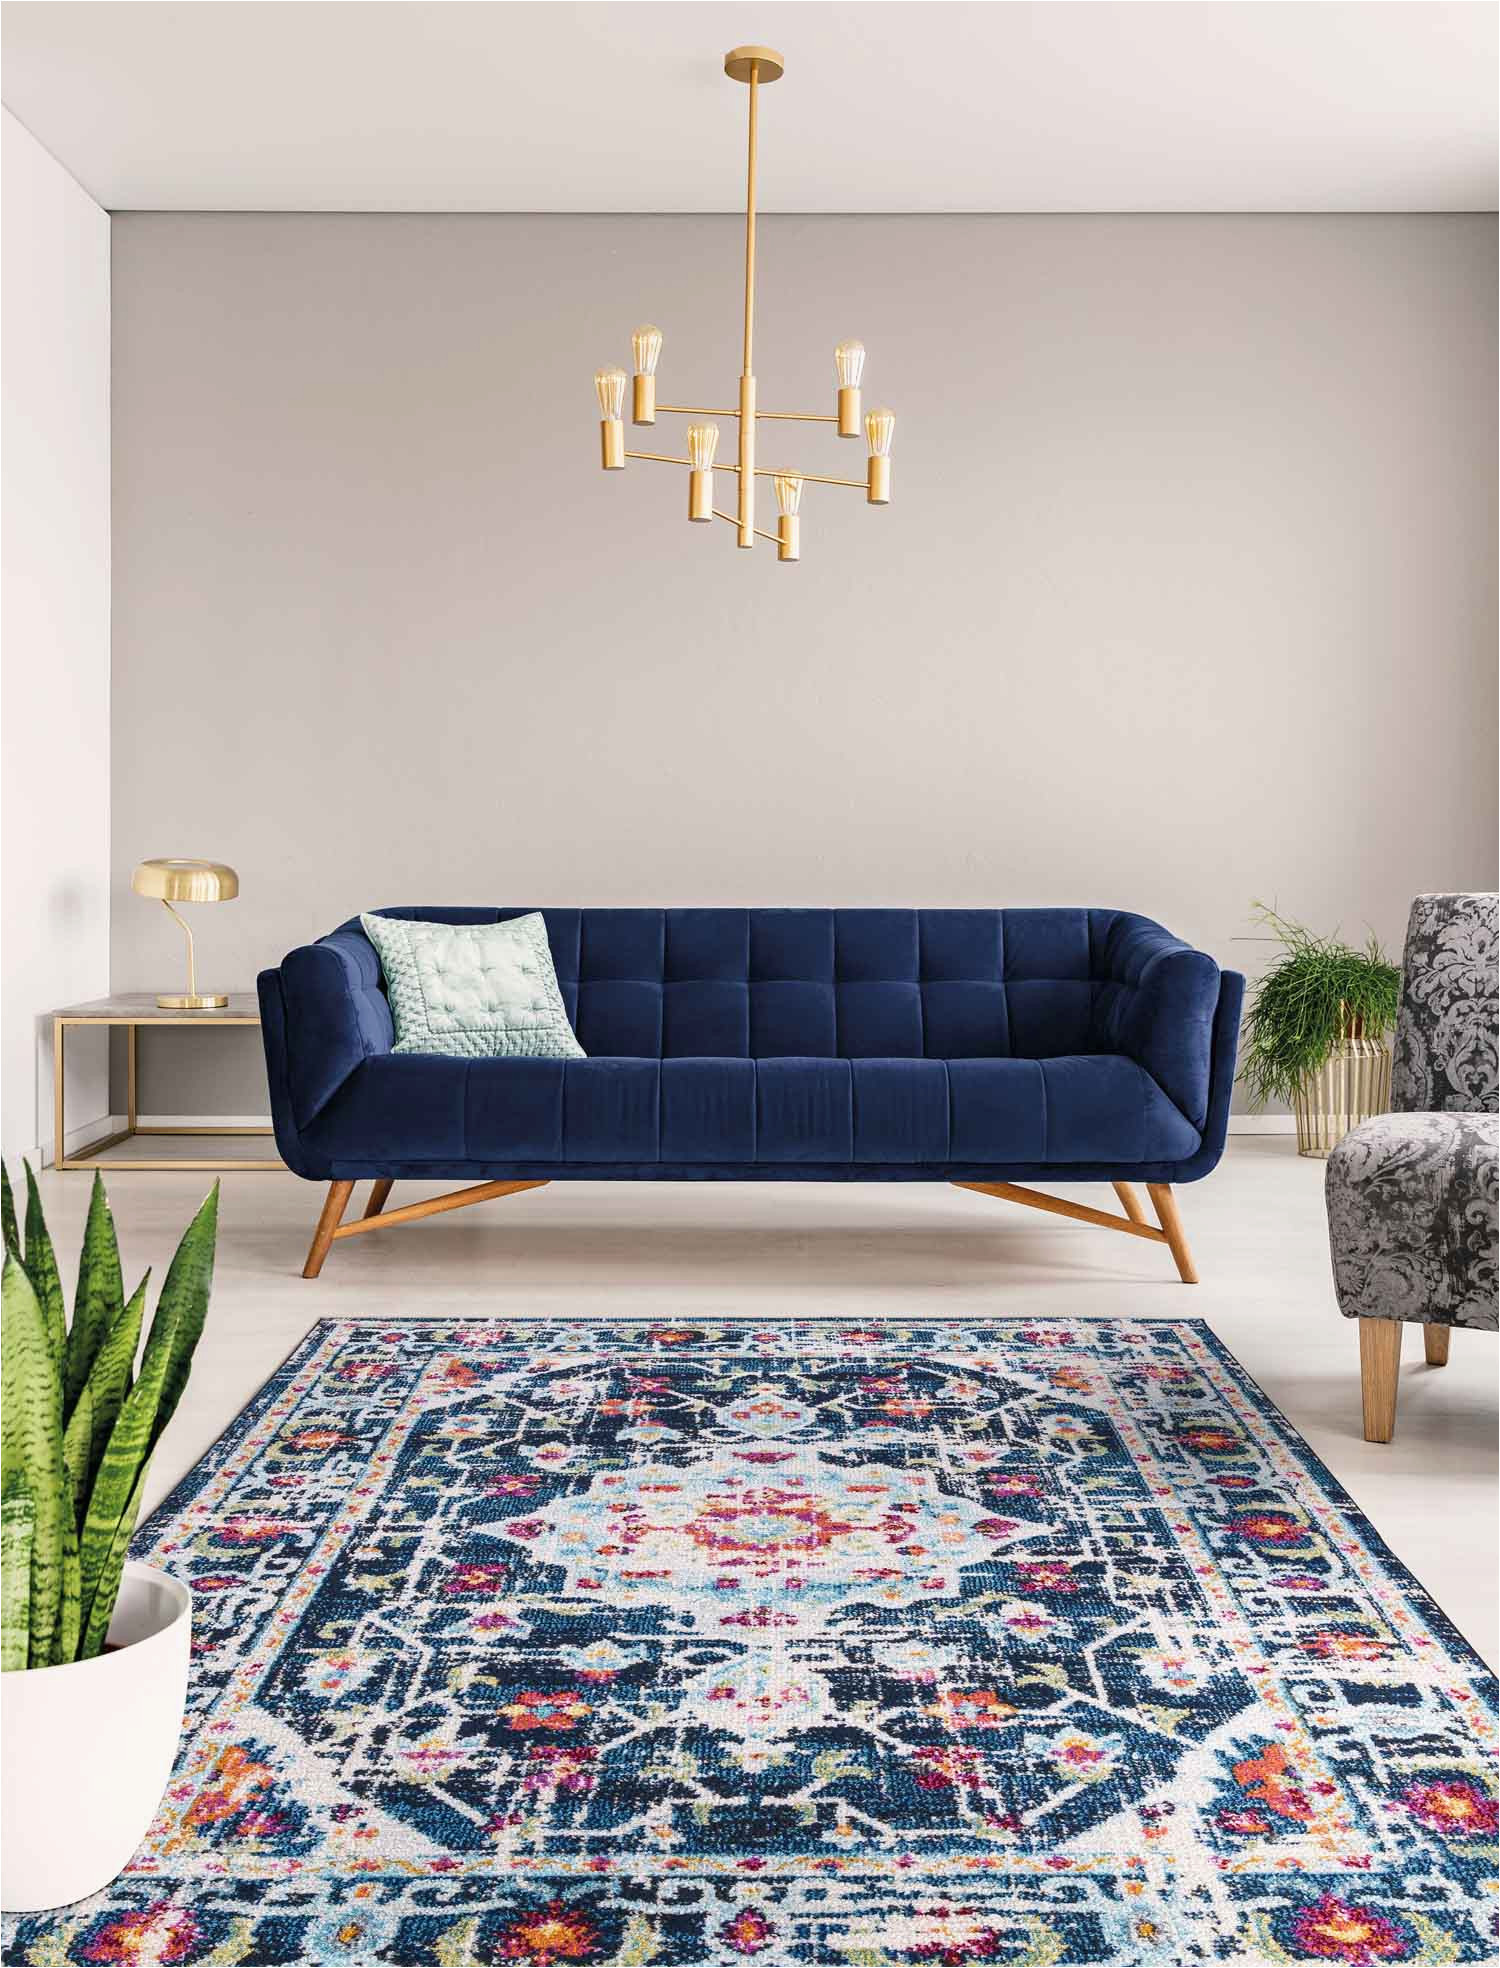 Navy Blue Dining Room Rug Mod Arte Jewel Collection area Rug Transitional Contemporary Style Medallion Distressed soft Plush Navy Blue Living Room Bedroom